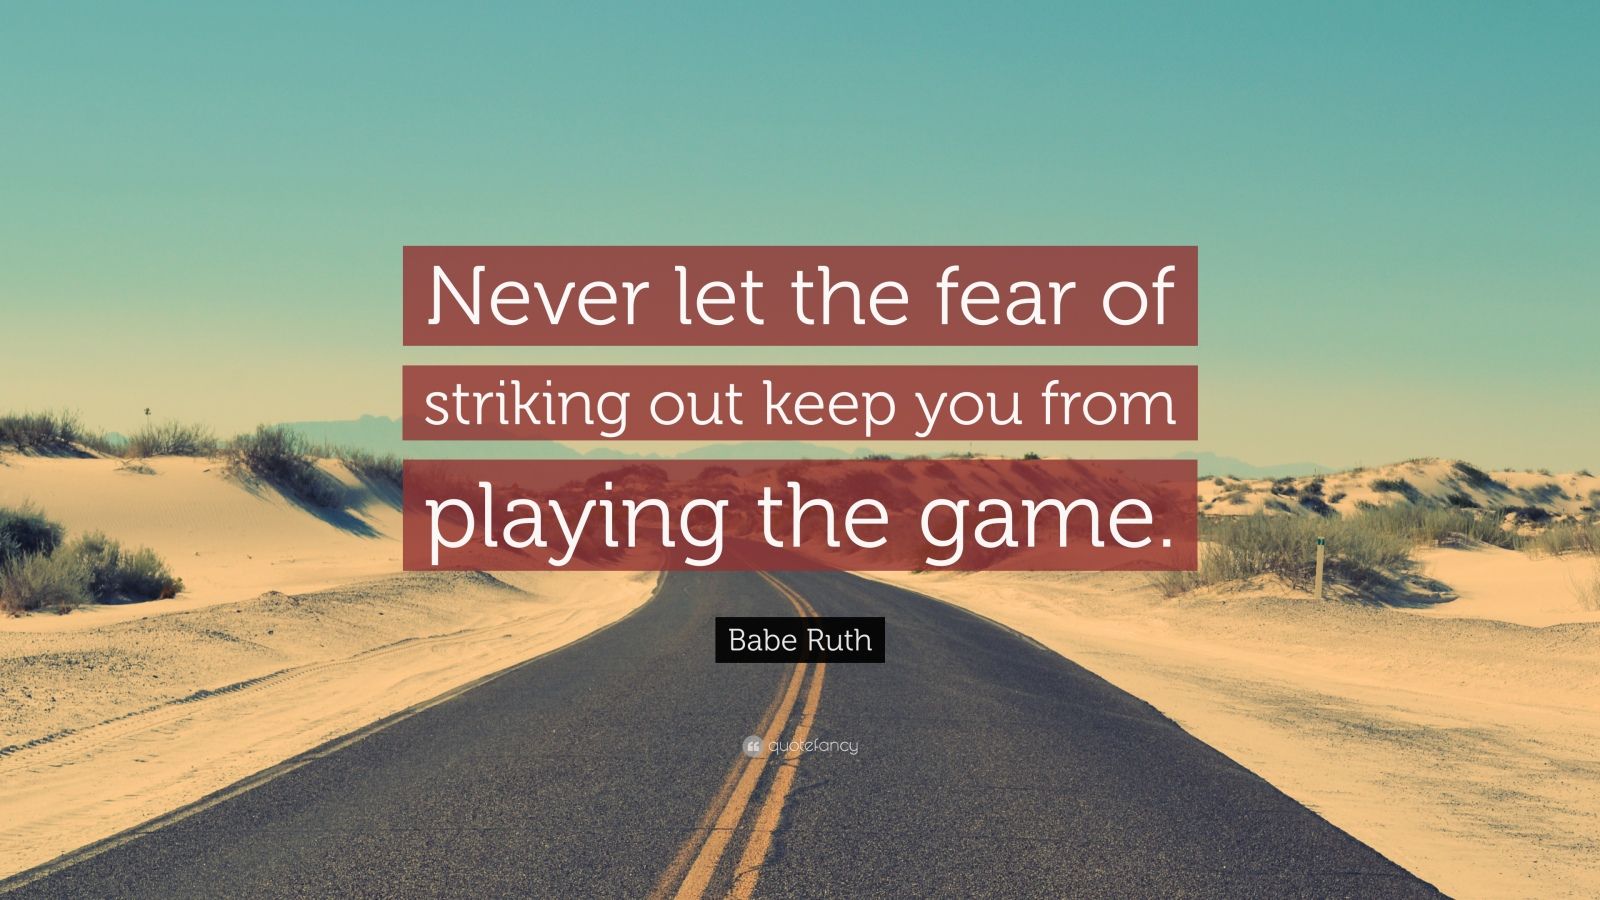 Babe Ruth Quote: “Never let the fear of striking out keep you from